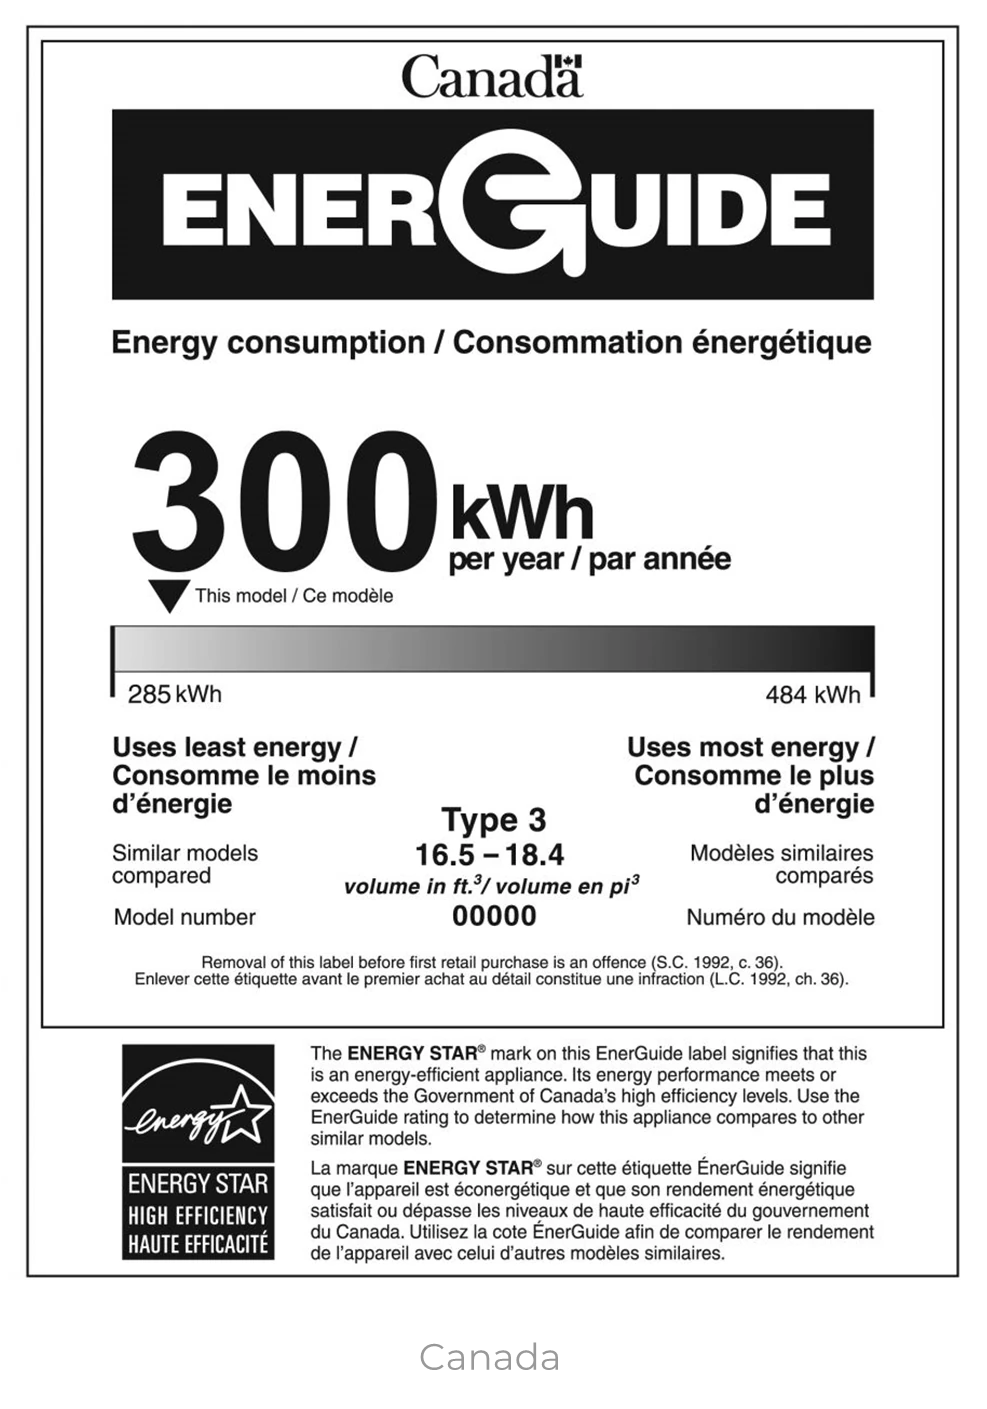 Example of how an energy label looks like in the Canada's EnerGuide program